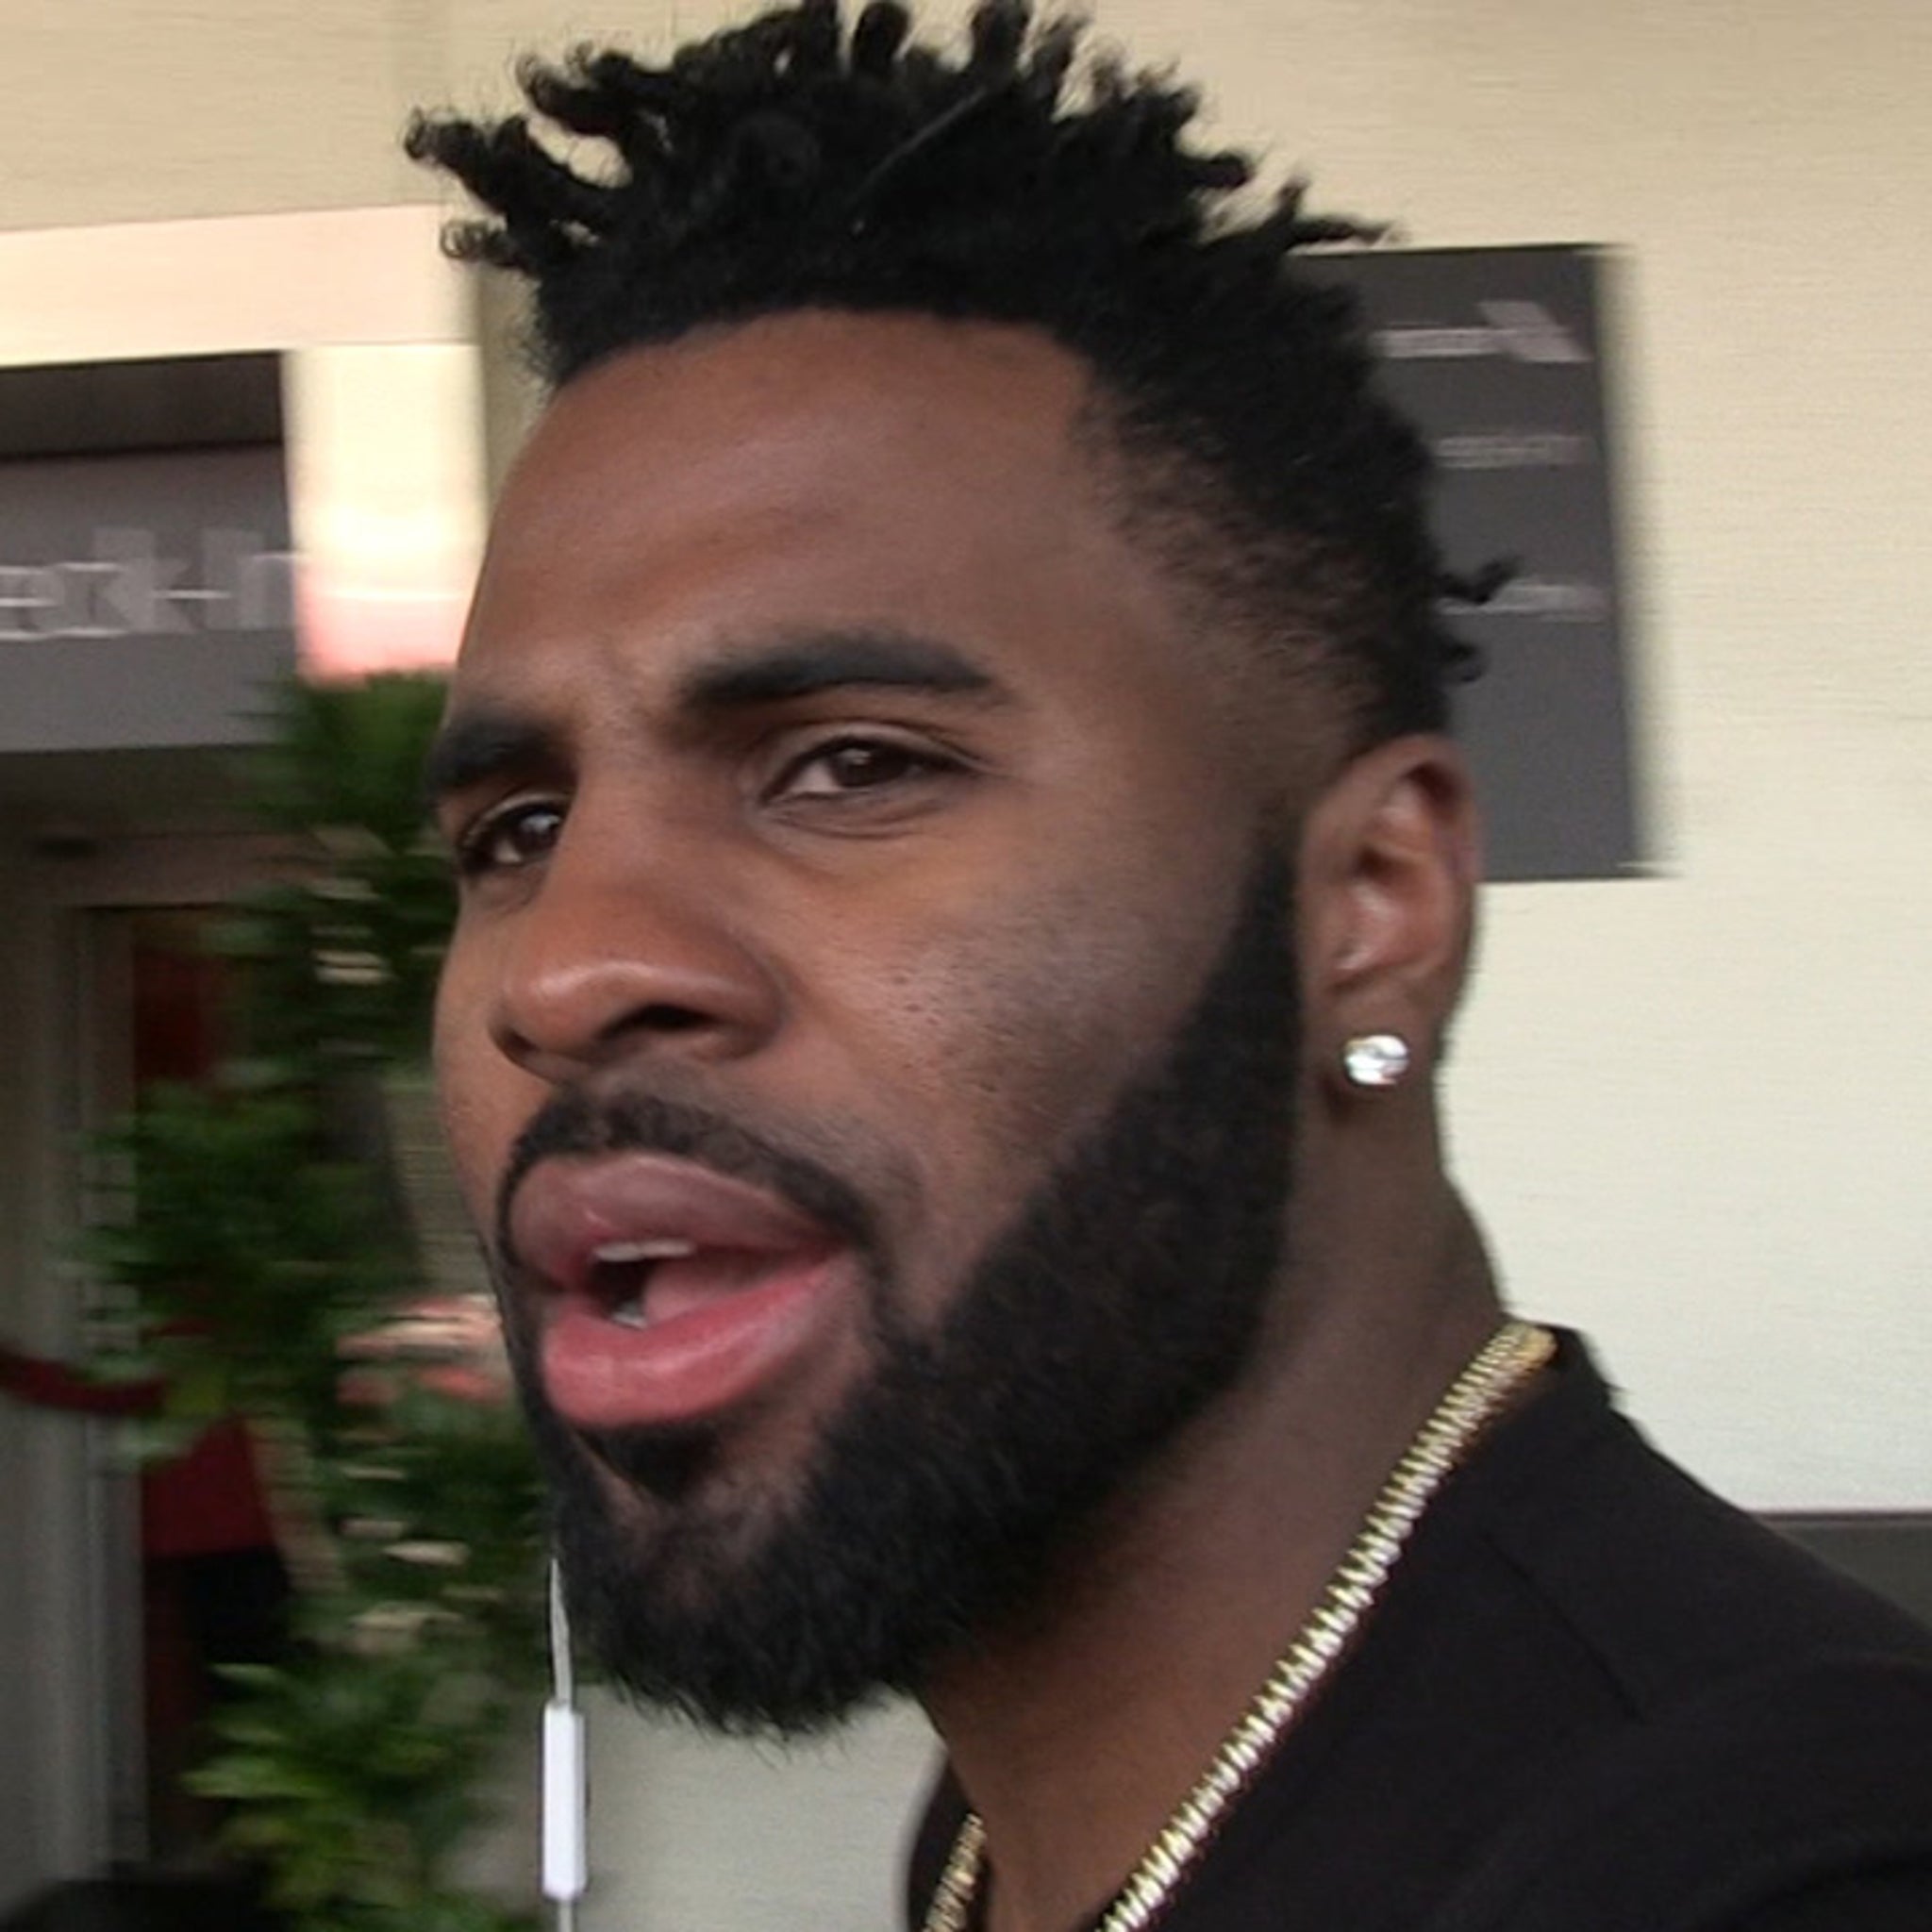 What Is Jason Derulo's Real Name?